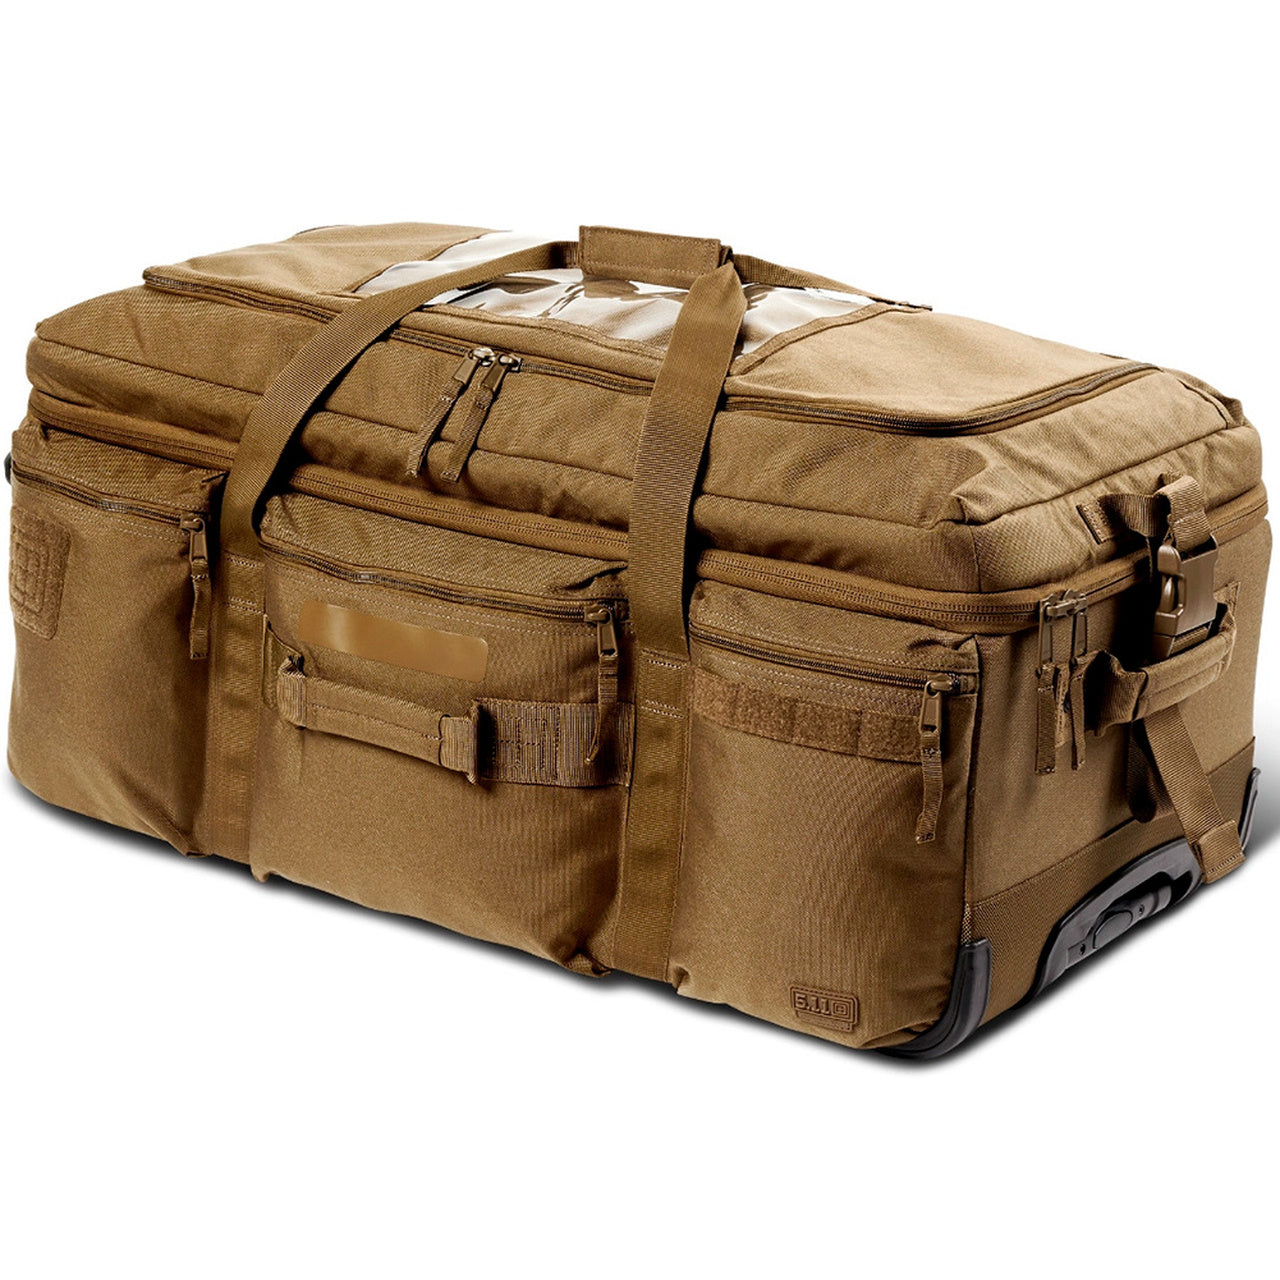 5.11 Tactical Mission Ready 3.0 Bag Bags, Packs and Cases 5.11 Tactical Kangaroo Tactical Gear Supplier Tactical Distributors Australia